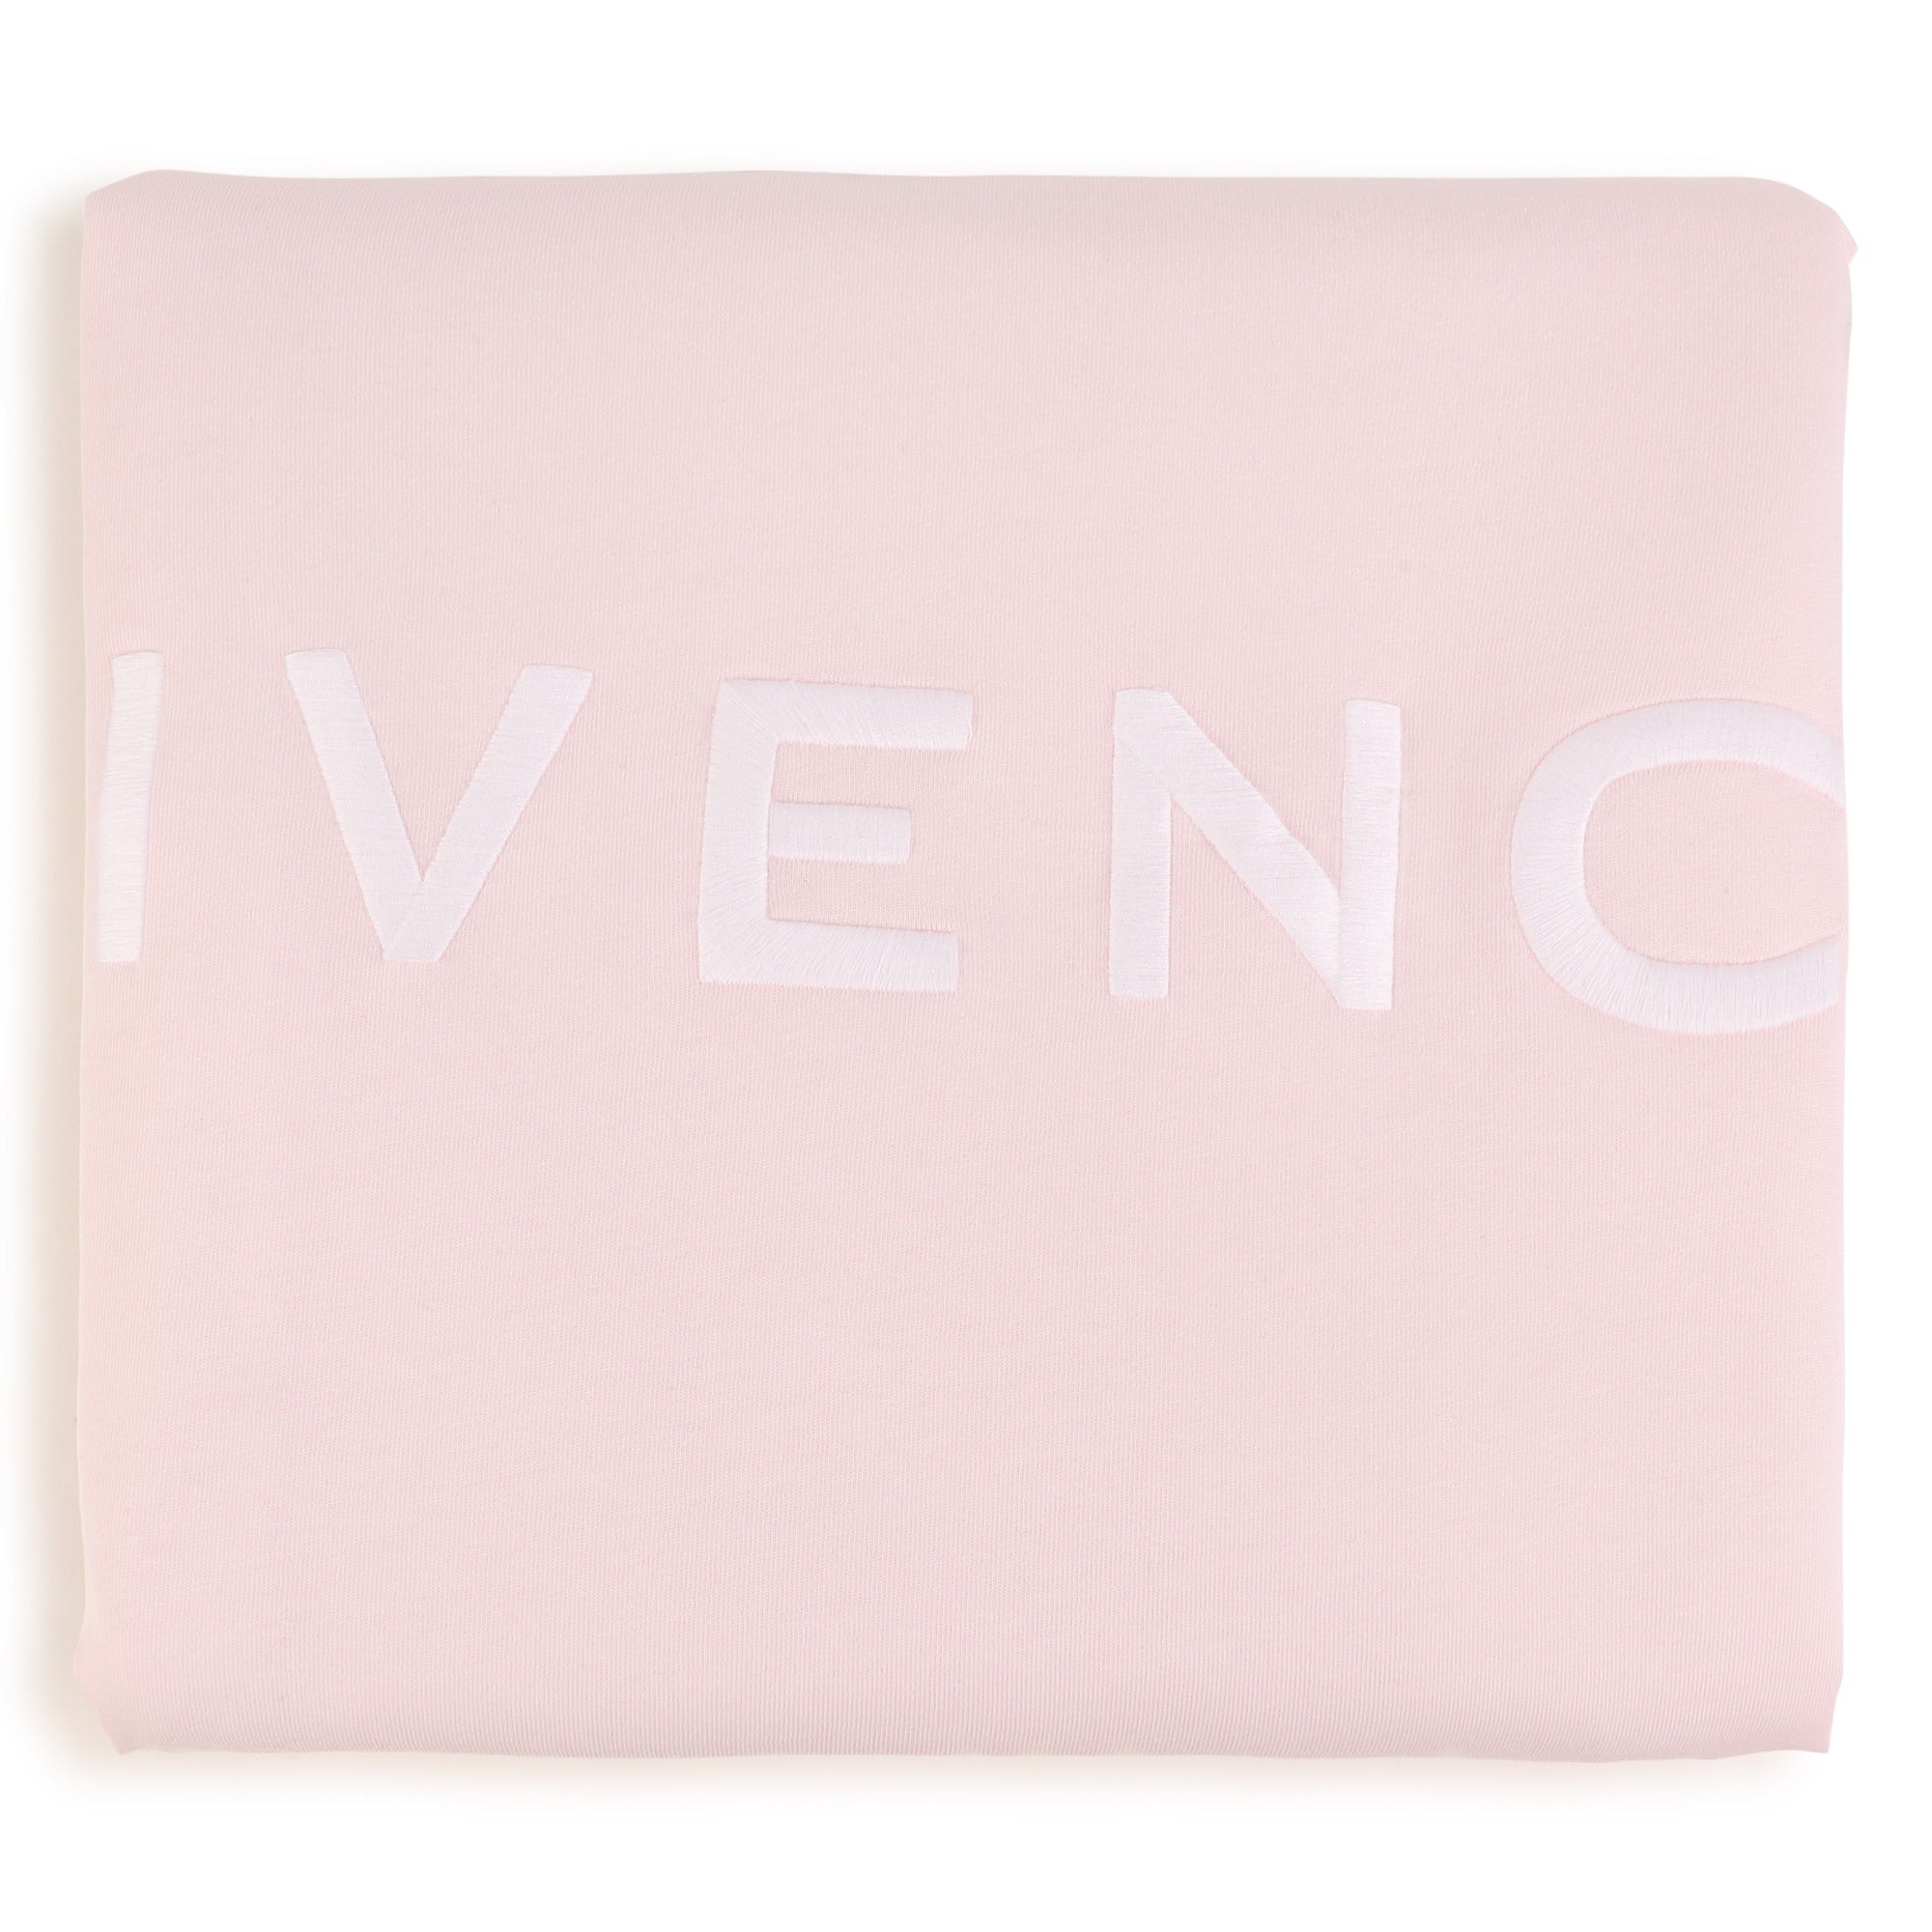 Givenchy Blanket Style: H90163